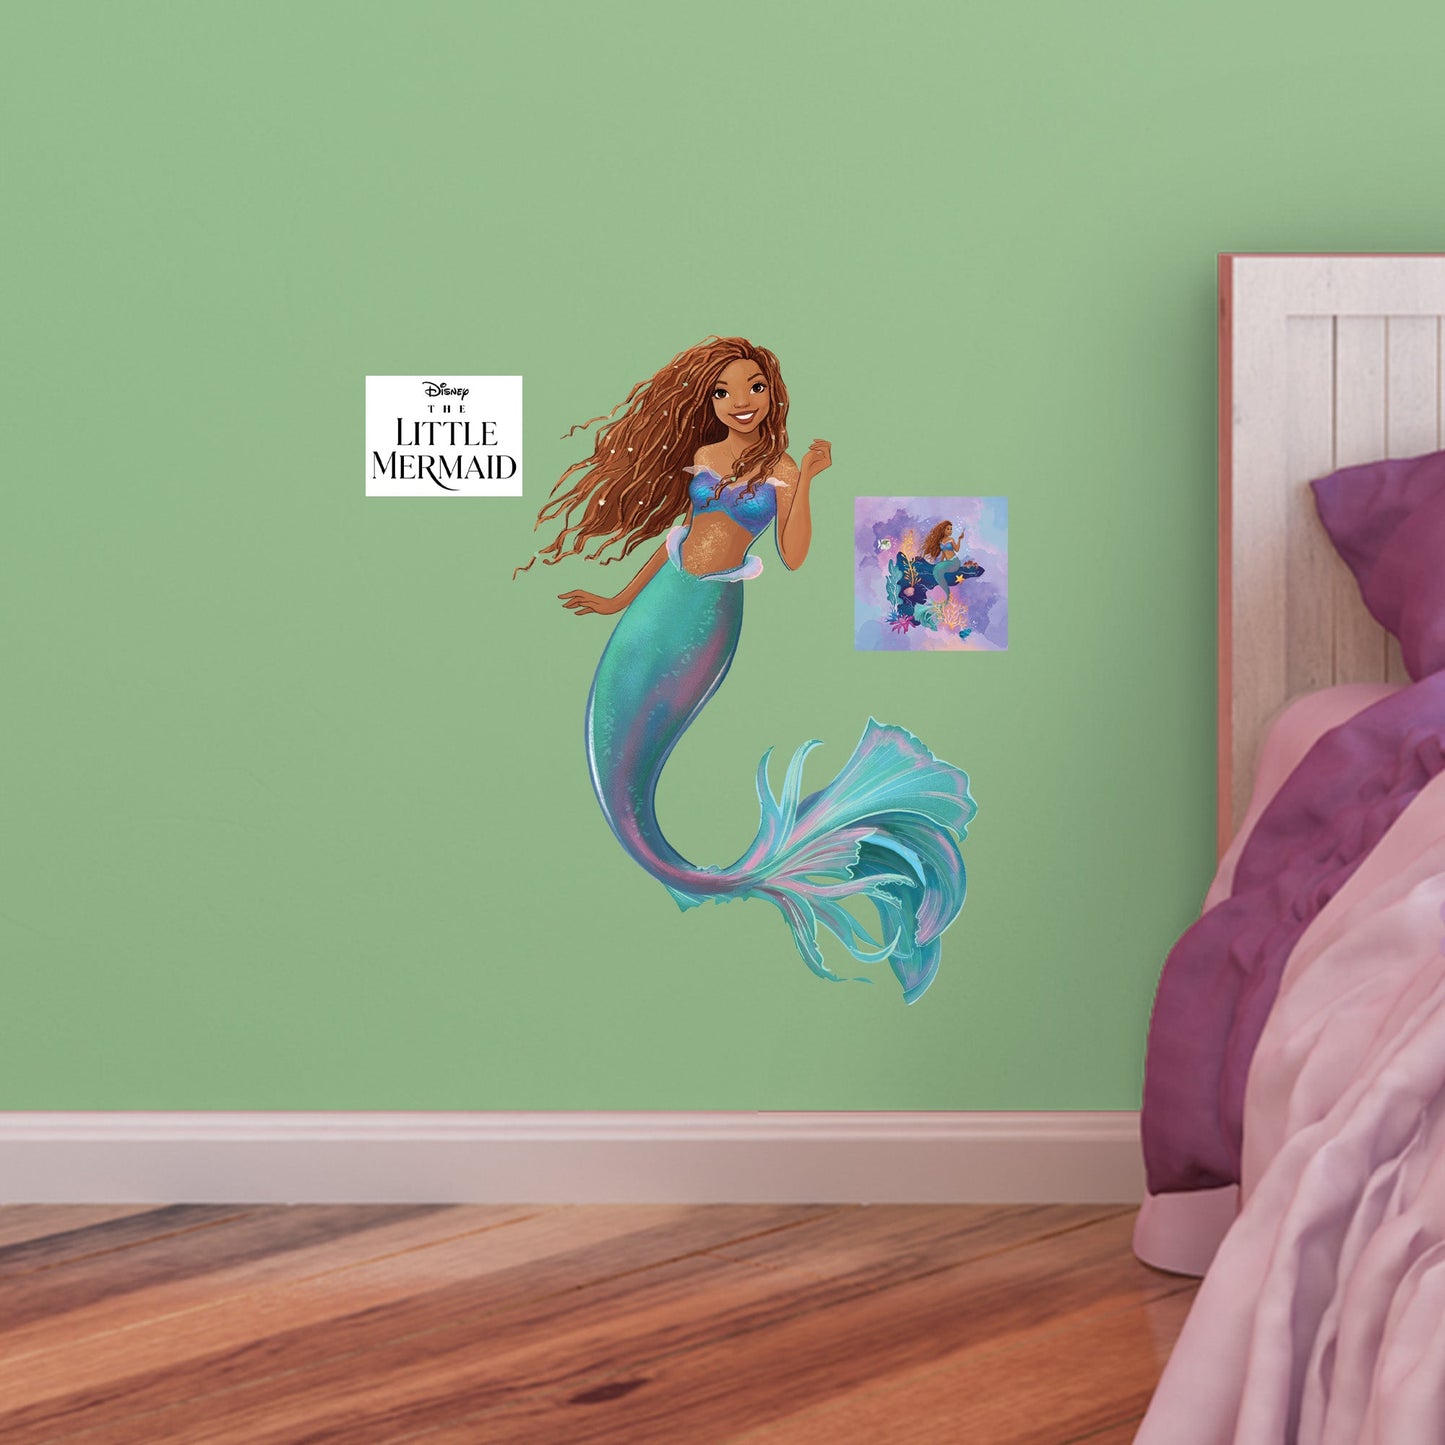 The Little Mermaid: Ariel Shimmering Seas RealBig        - Officially Licensed Disney Removable     Adhesive Decal